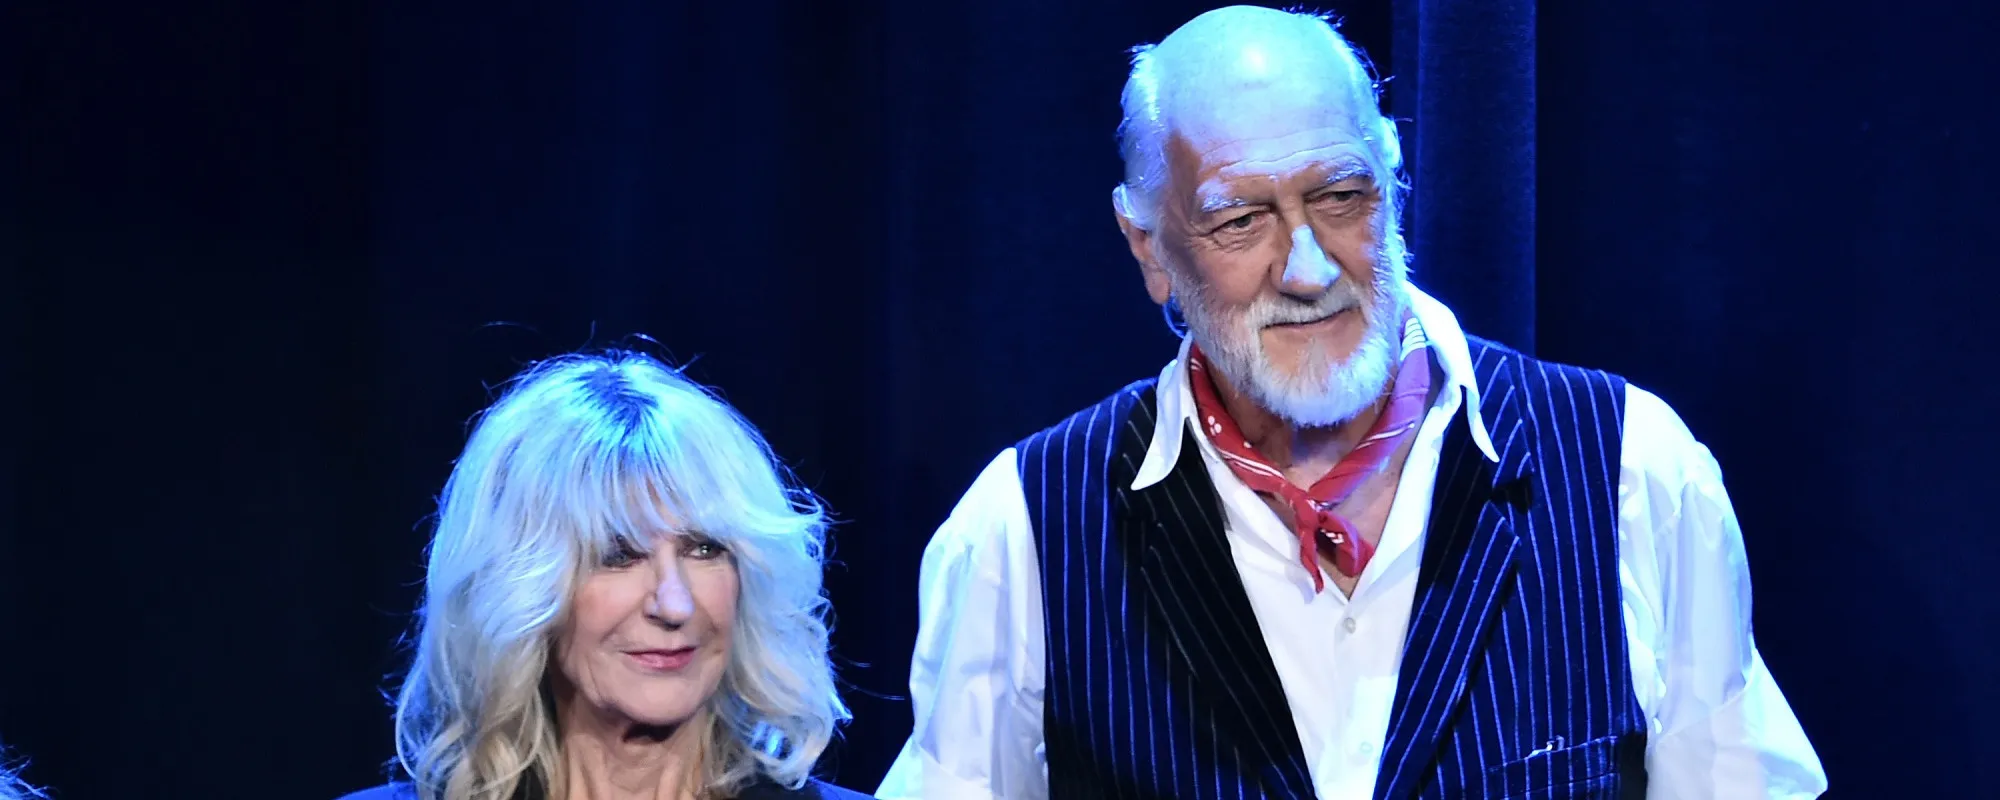 Mick Fleetwood Pays Tribute to Christine McVie on Anniversary of Her Death: “Fleetwood Mac Misses You”